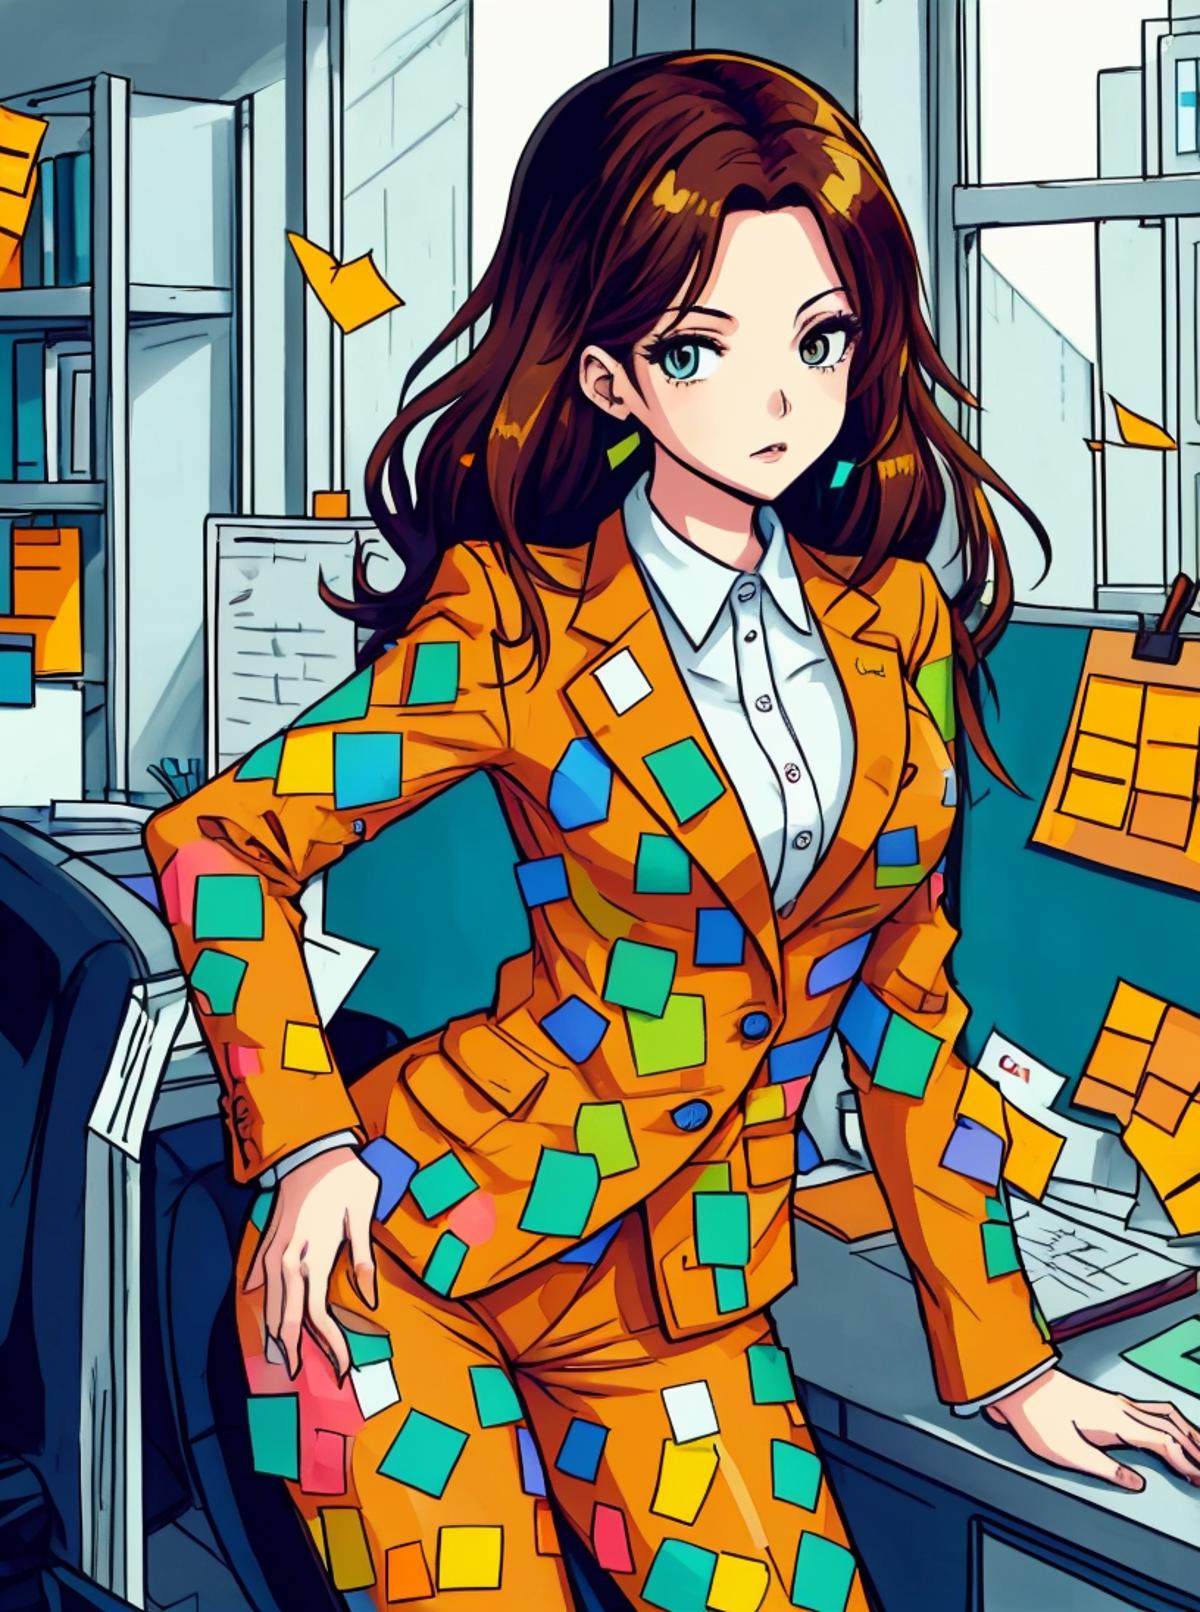 A woman wearing a colorful suit poses in an office setting.